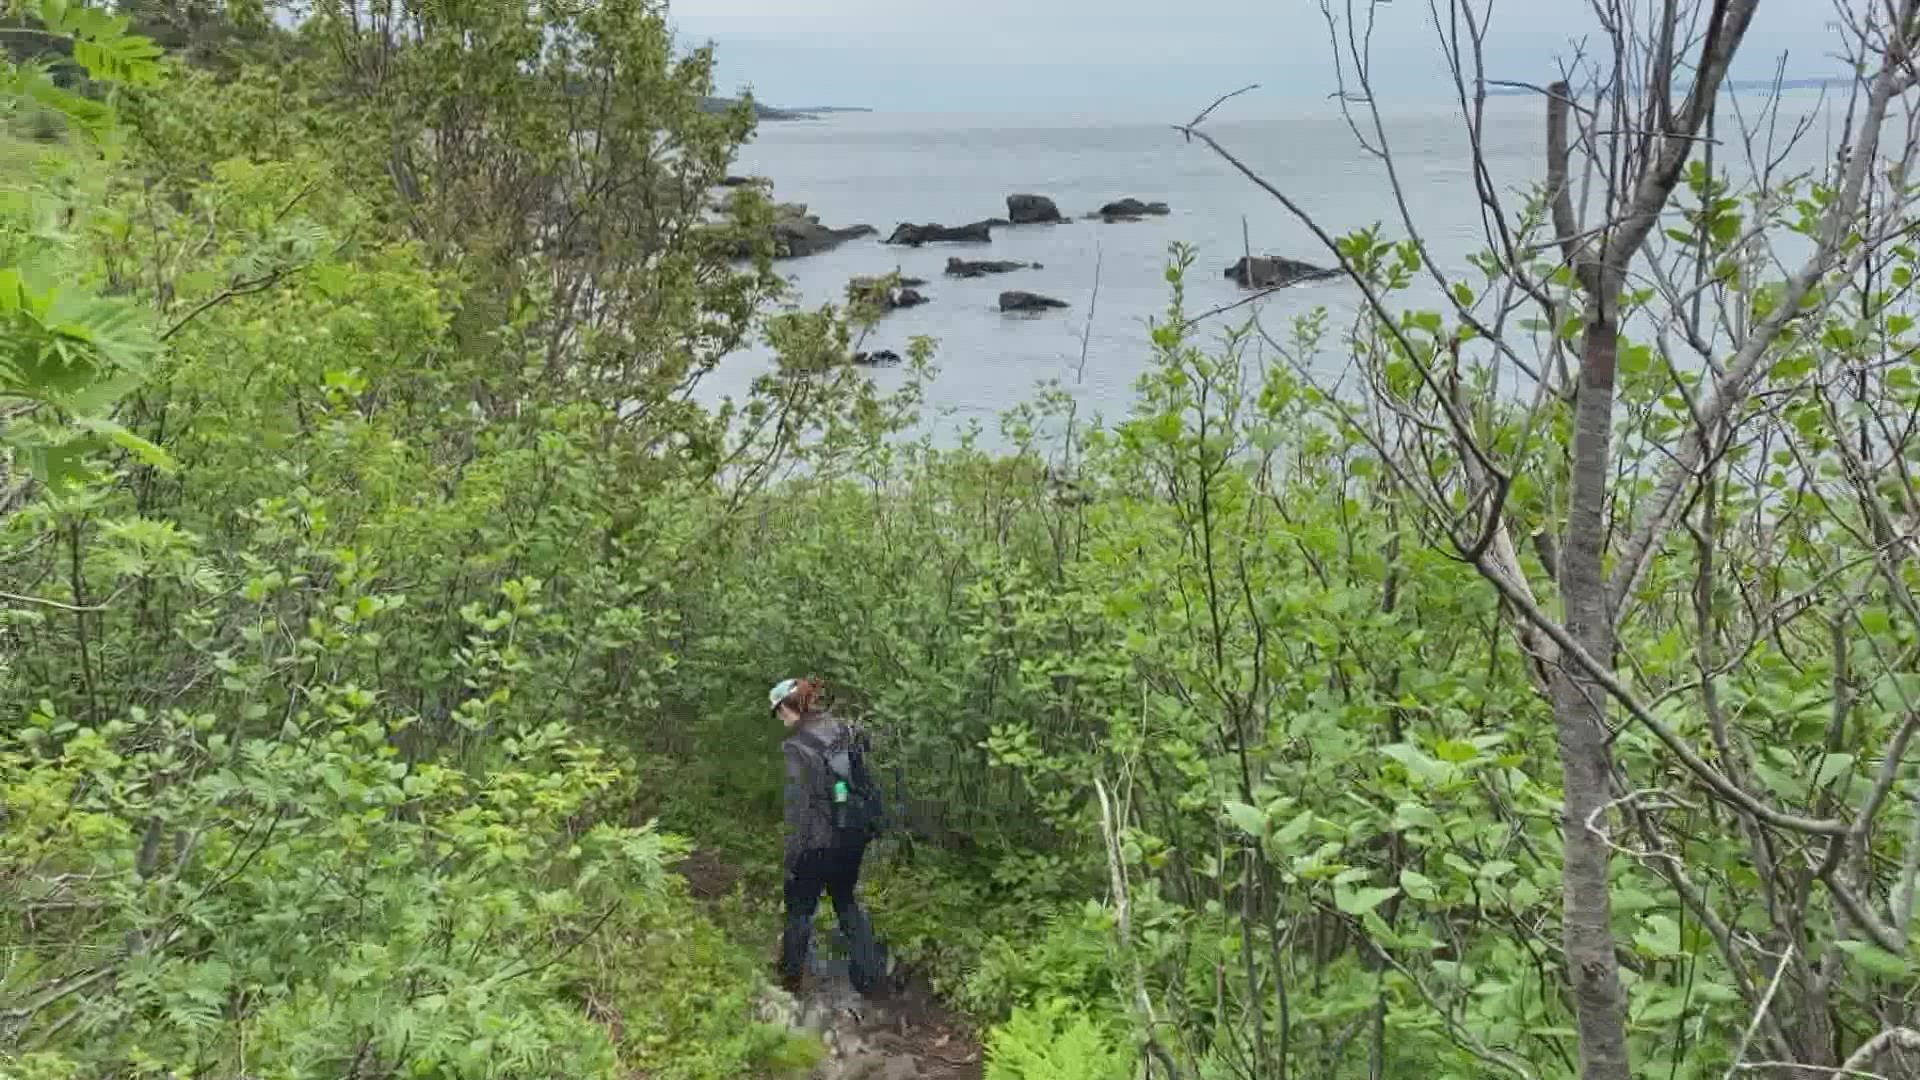 This week Meteorologist Mallory Brooke journeys far Downeast, to one of the most picturesque and rugged parts of the state's shoreline.